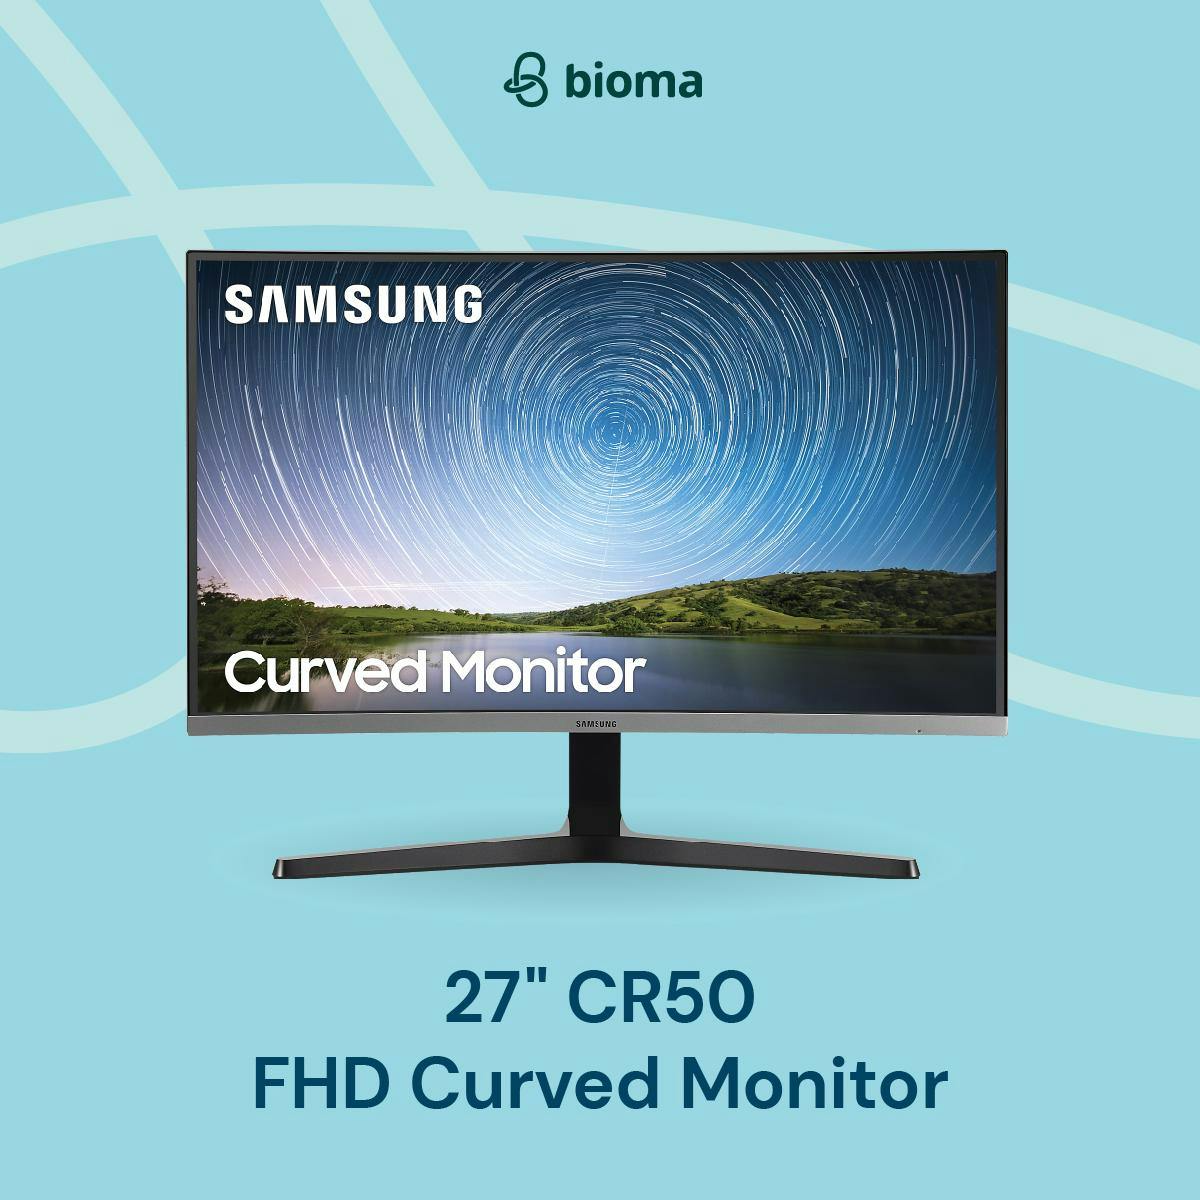 Image 270 27" CR50 FHD Curved Monitor